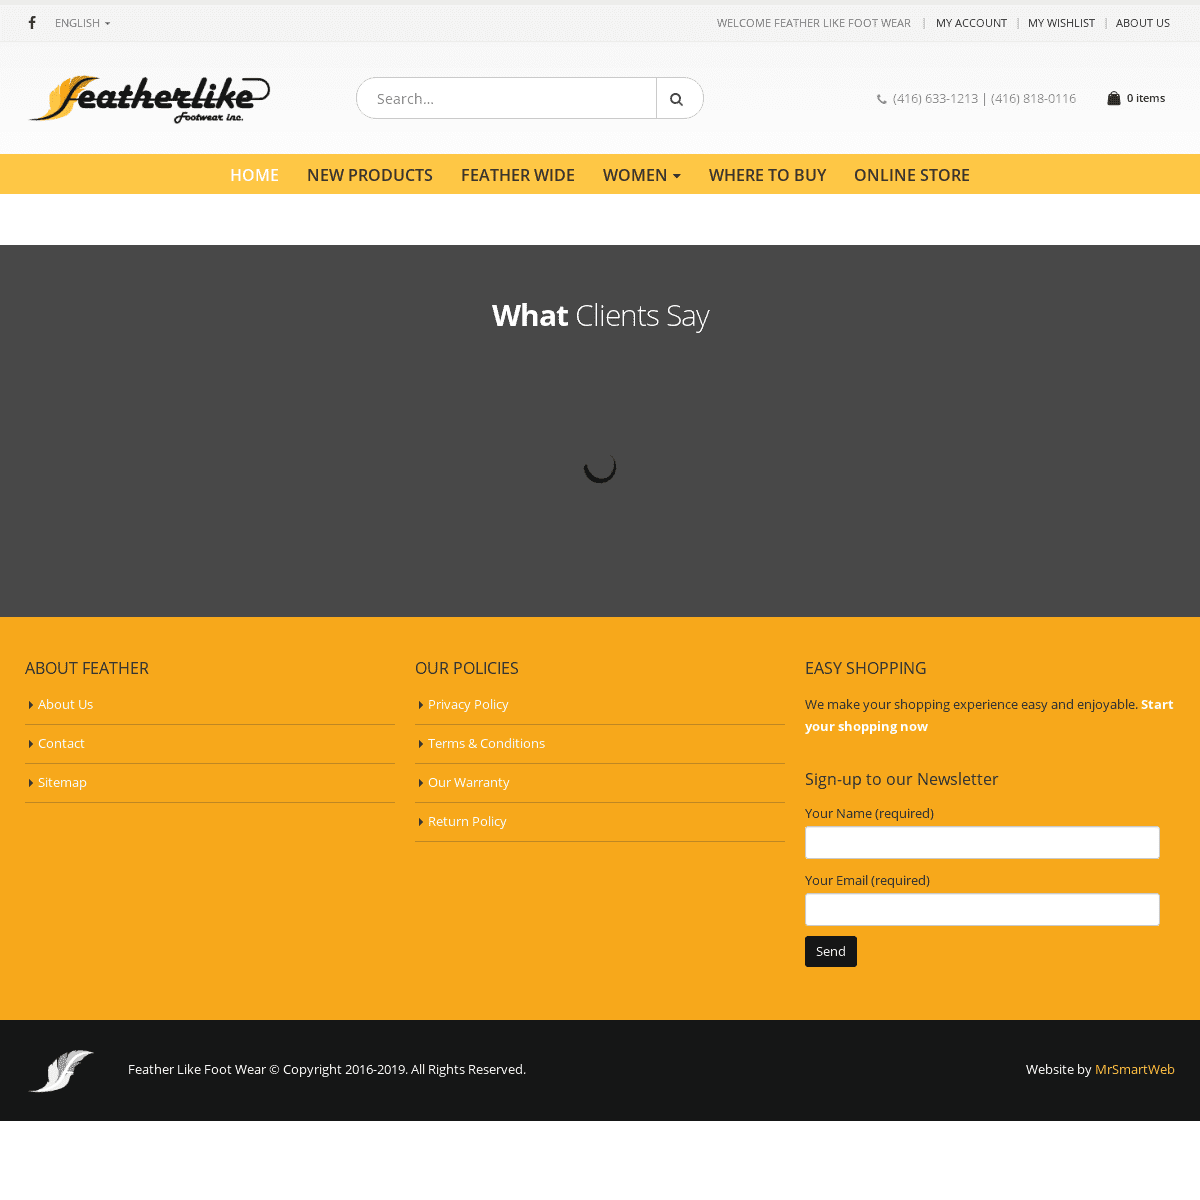 A complete backup of featherlikefootwear.com